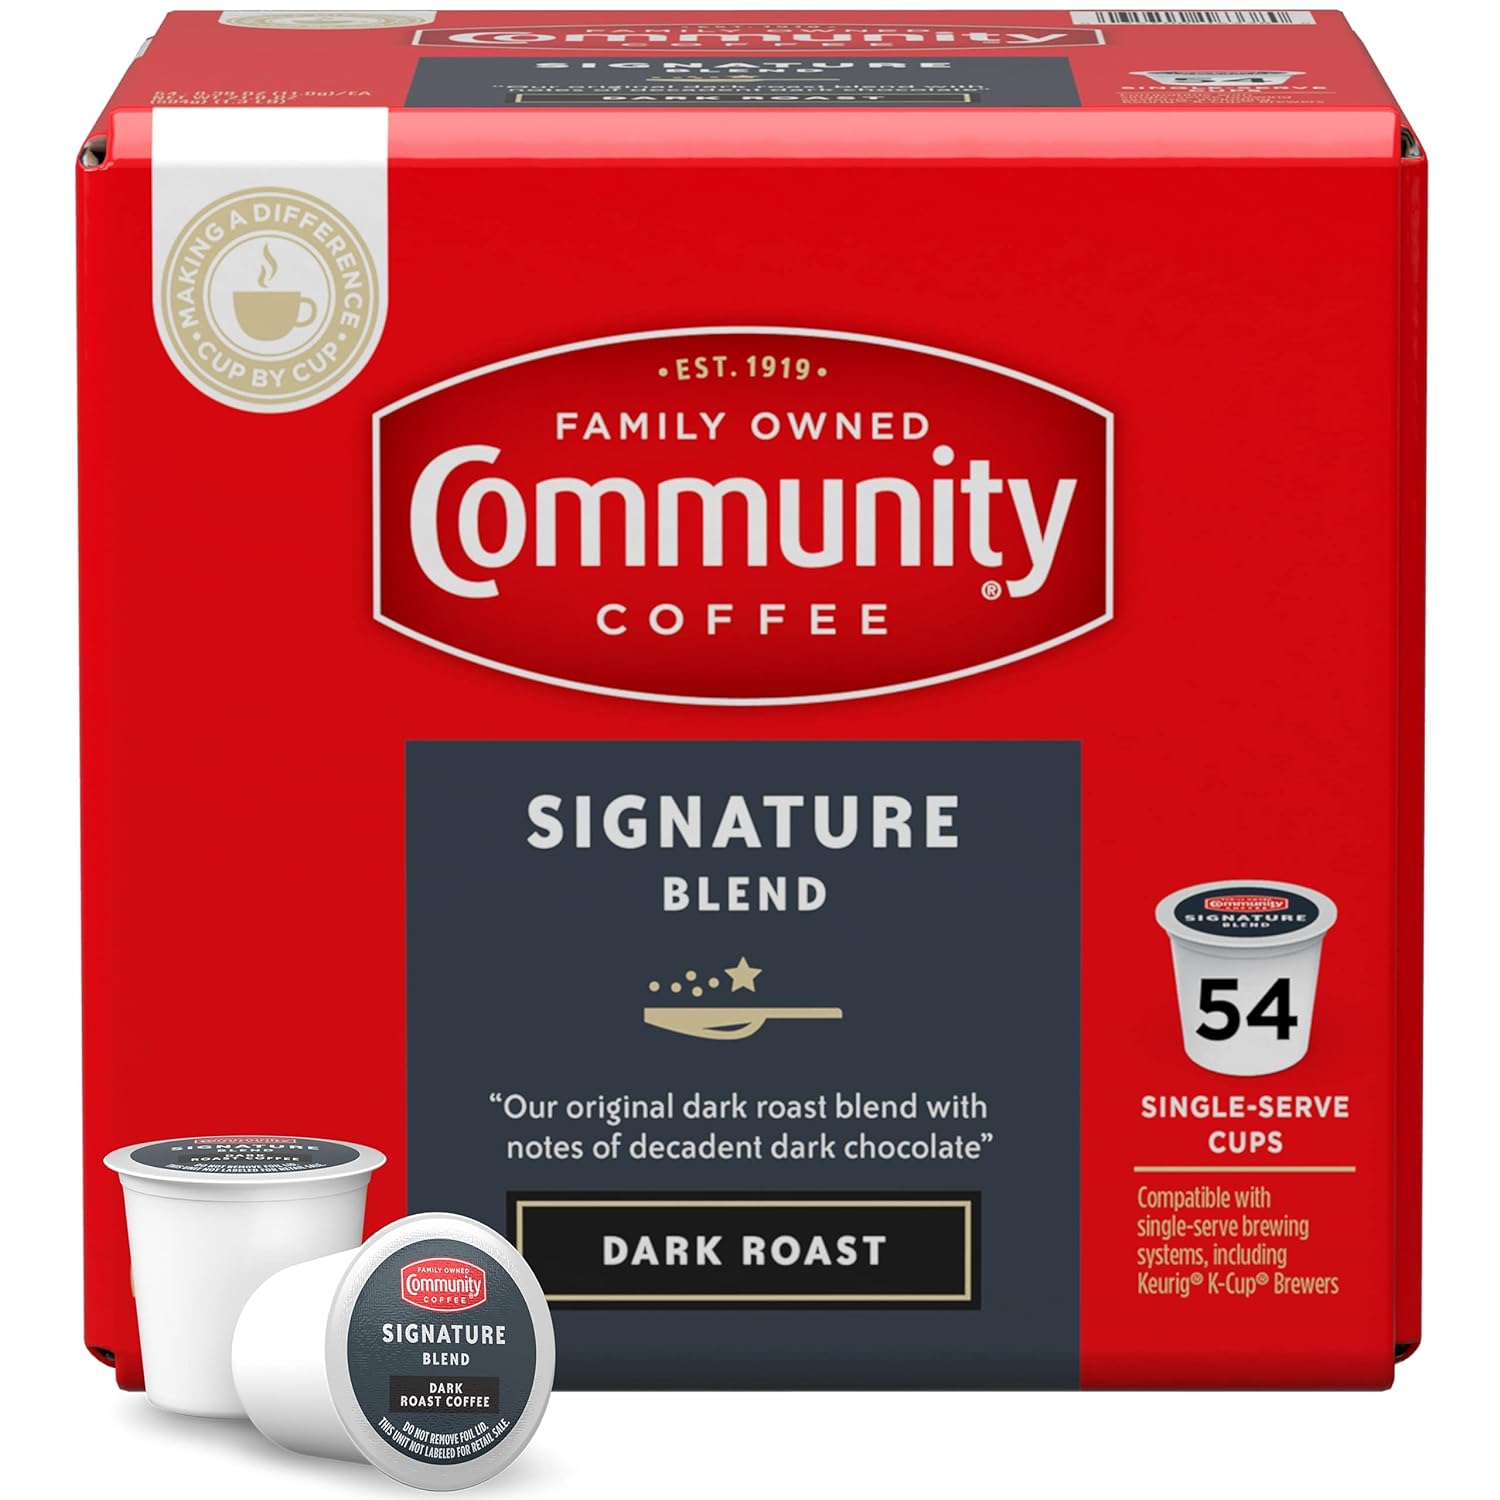 Community Coffee Signature Blend 54 Count Coffee Pods, Dark Roast, Compatible with Keurig 2.0 K-Cup Brewers, 54 Count (Pack of 1)